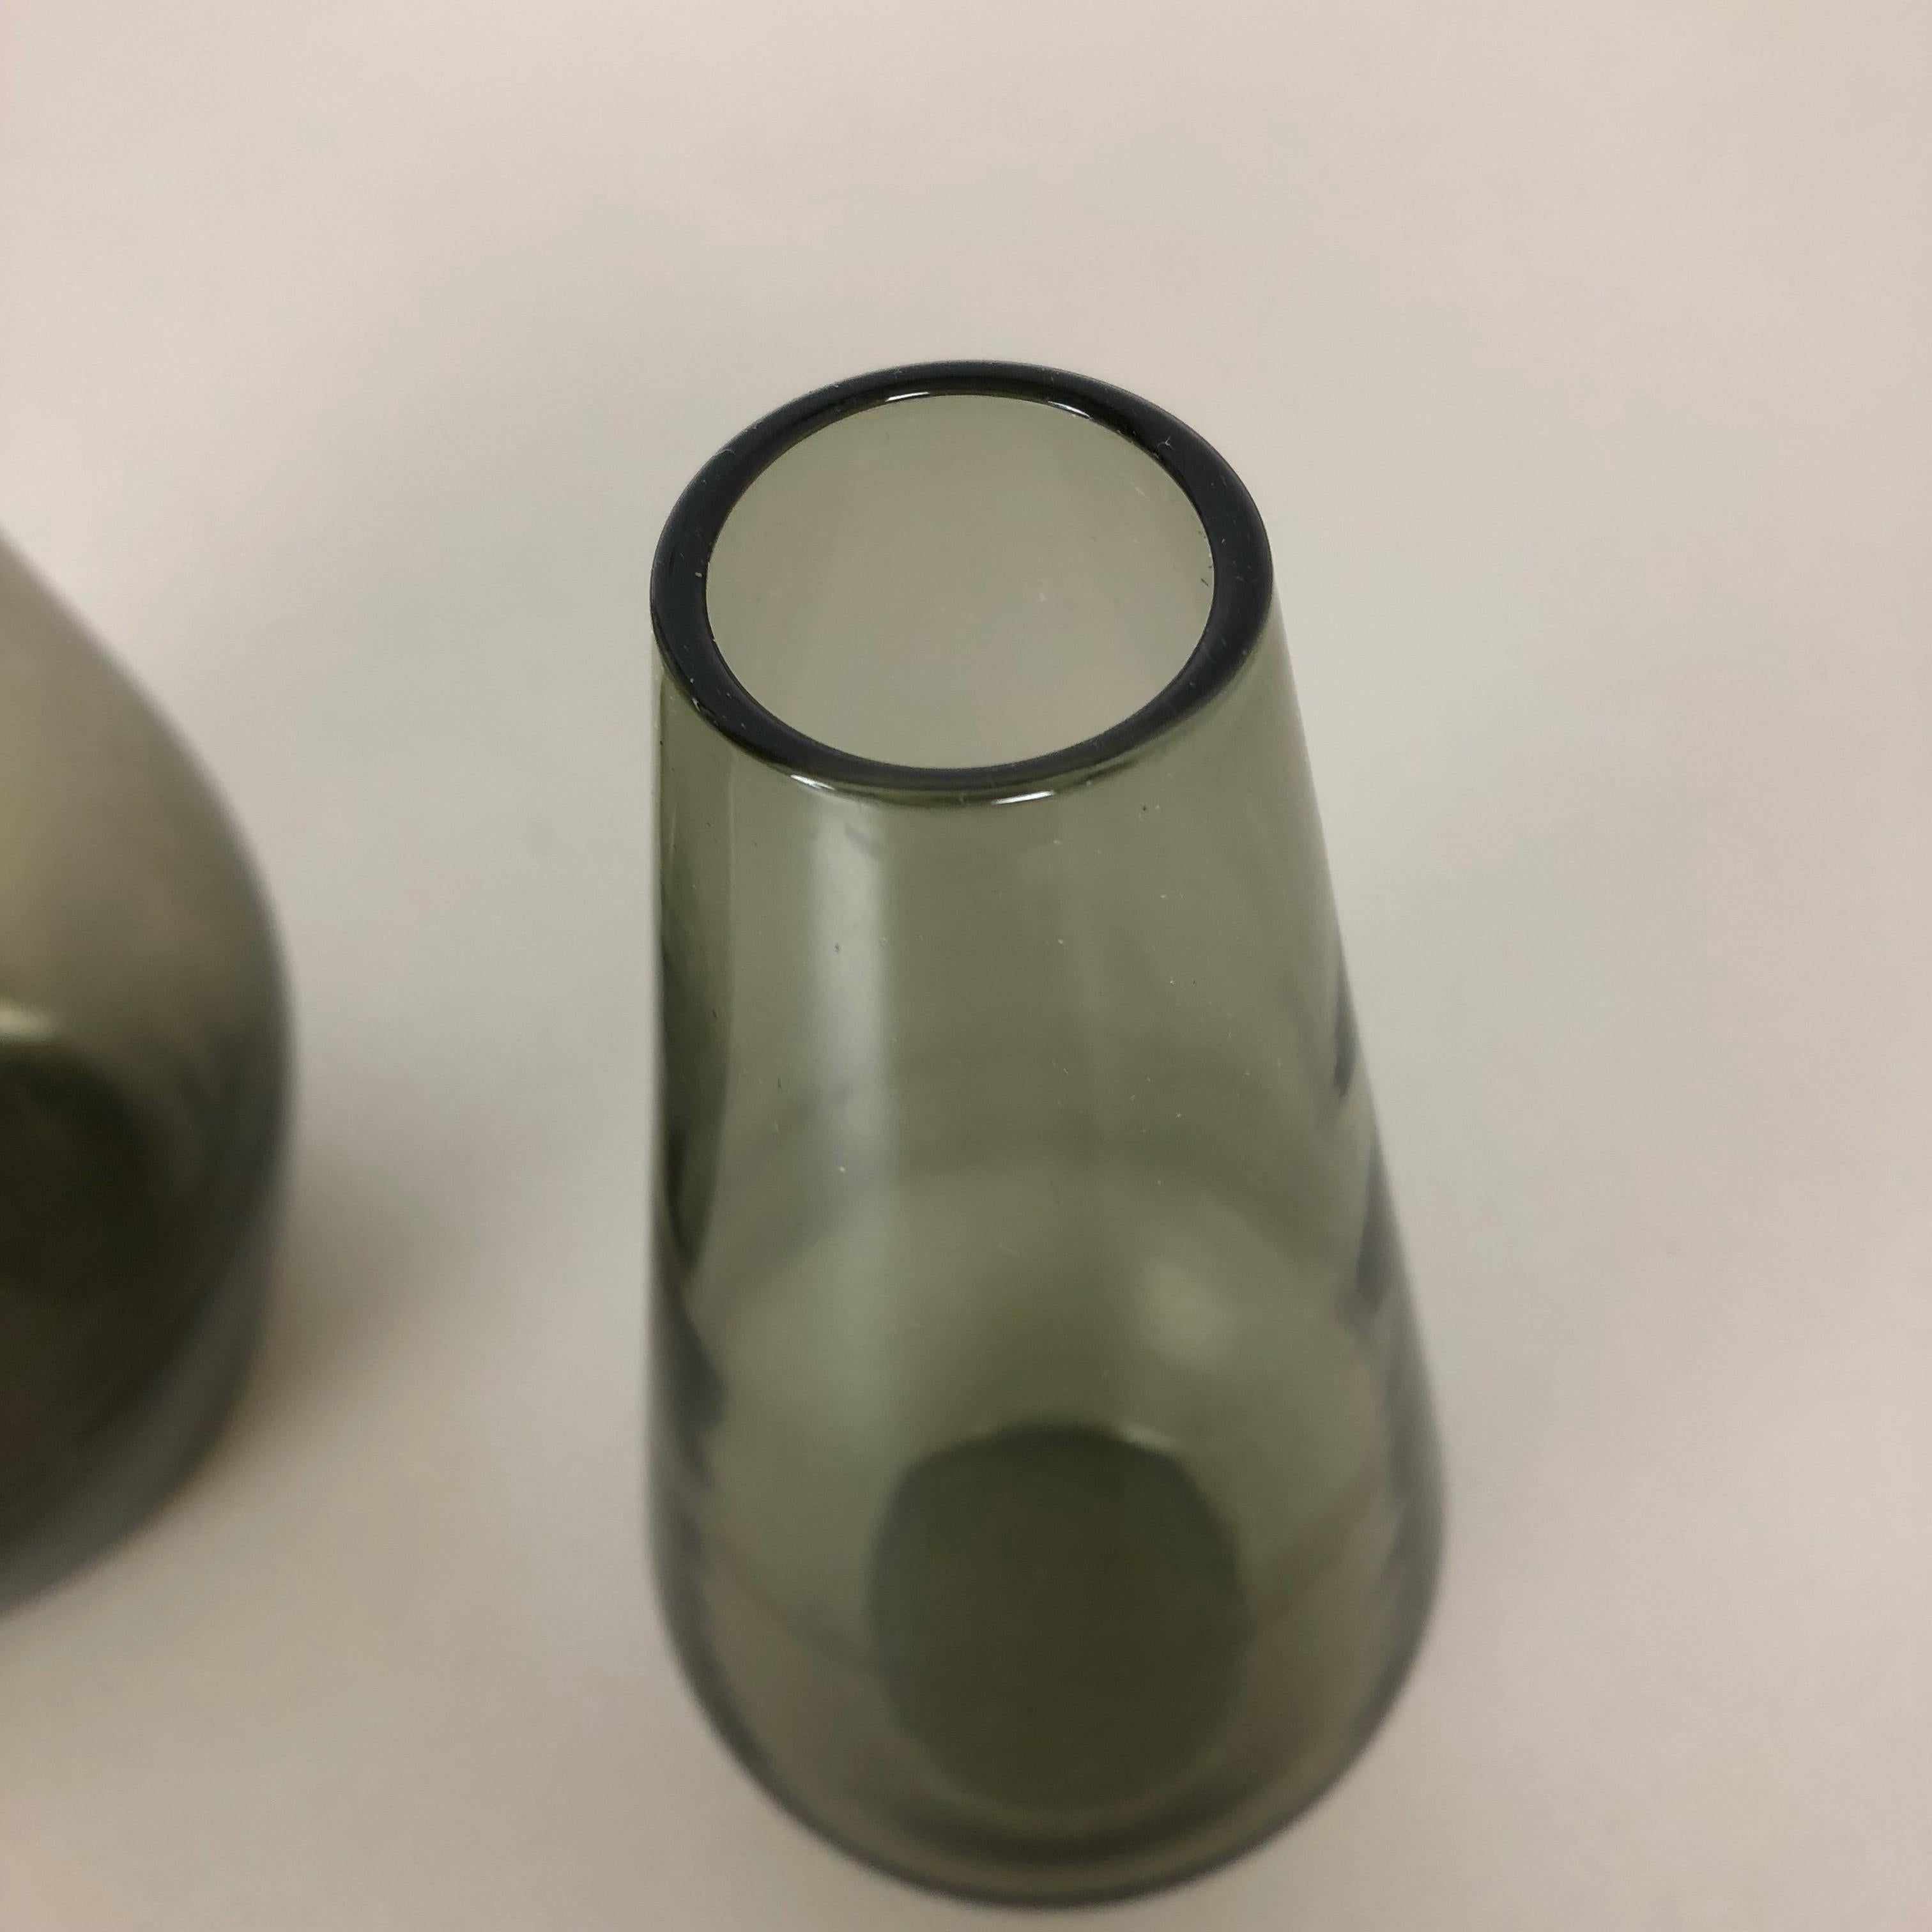 Vintage 1960s Set of 2 Turmaline Vases by Wilhelm Wagenfeld for WMF, Germany For Sale 1